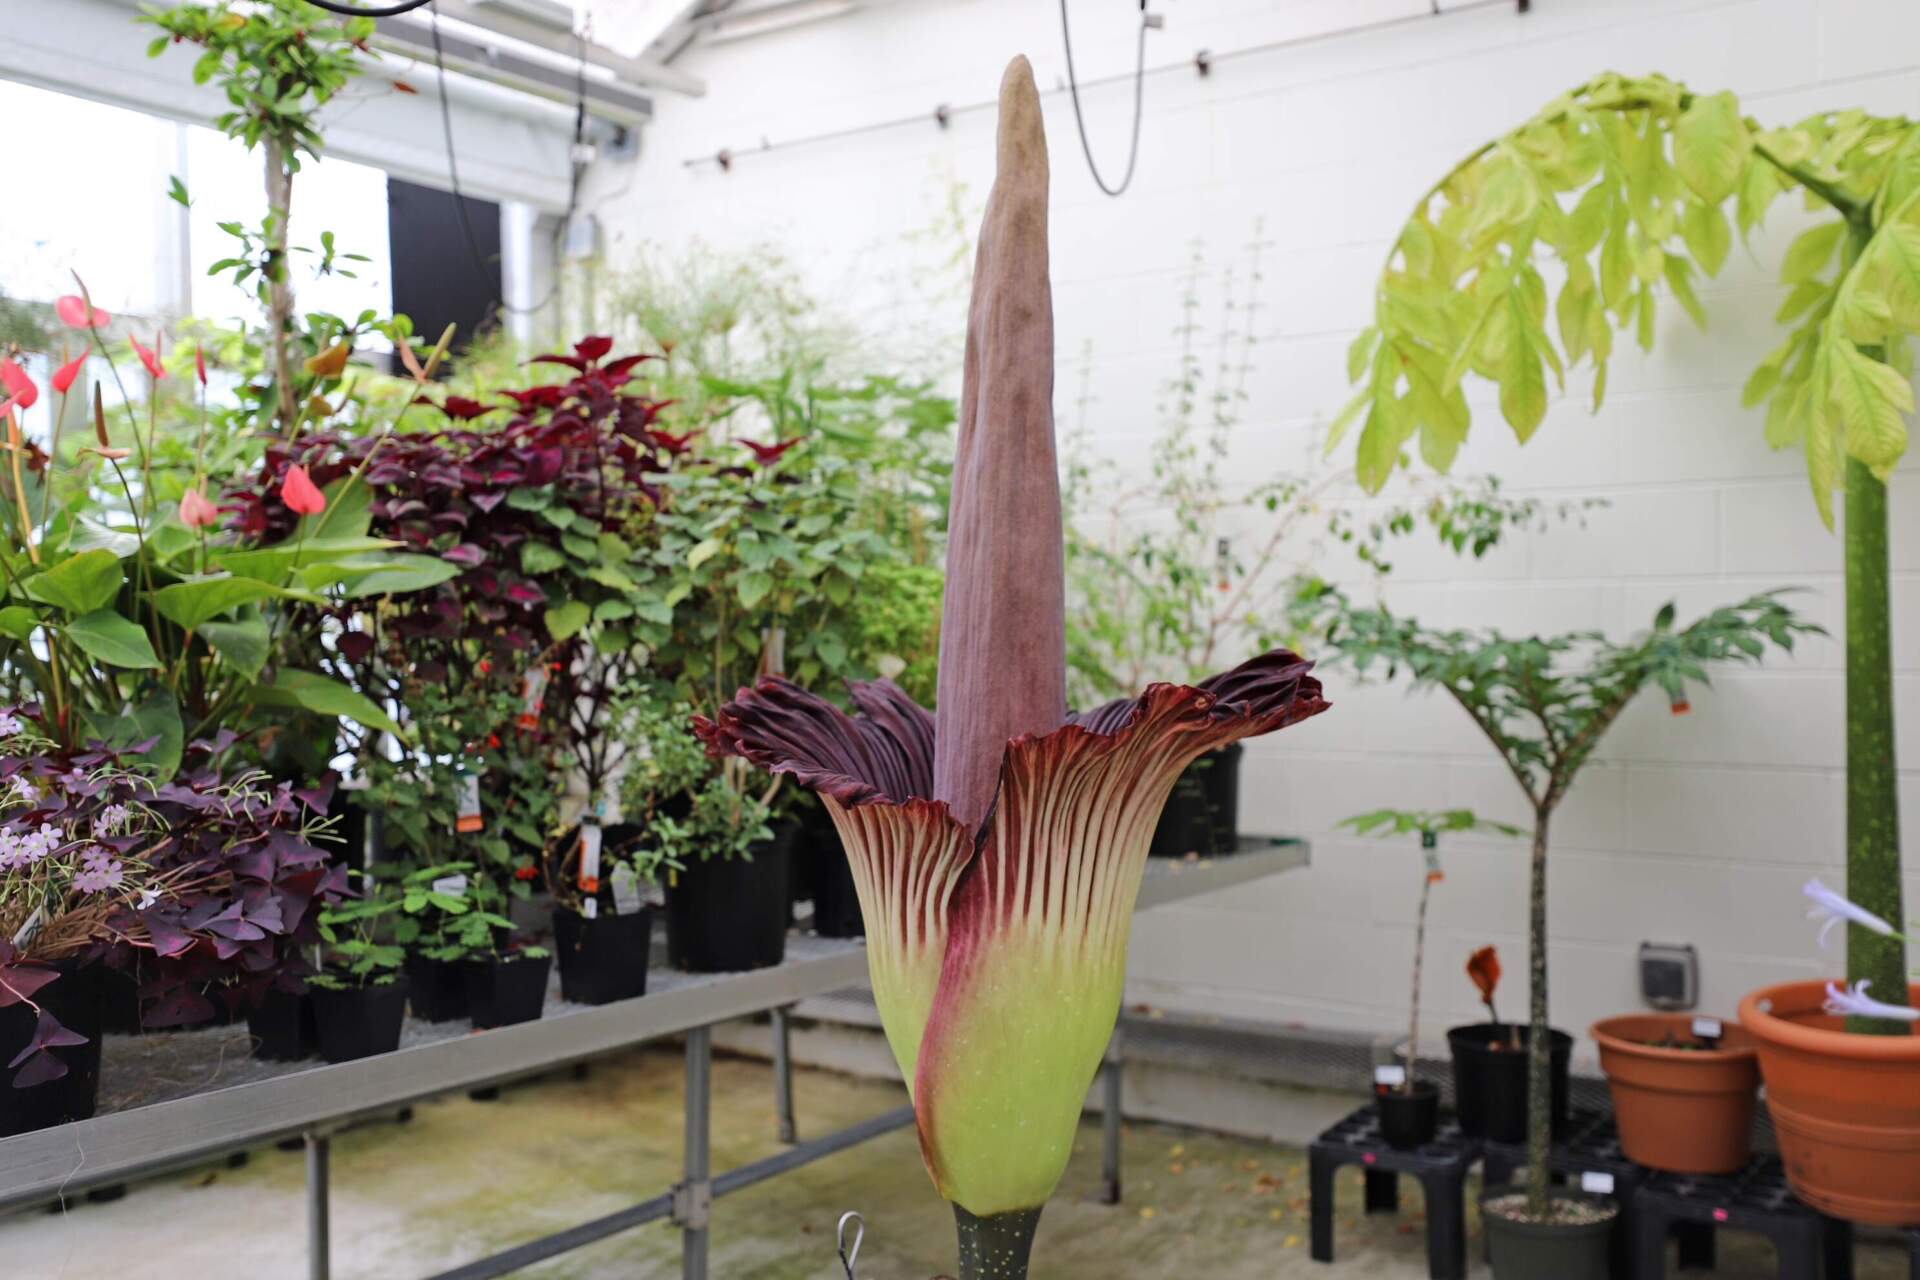 Dame Judi Stench, a corpse flower, is in full bloom at the Arnold Arboretum's teaching greenhouse. (Courtesy Jon Herman/Arnold Arboretum)